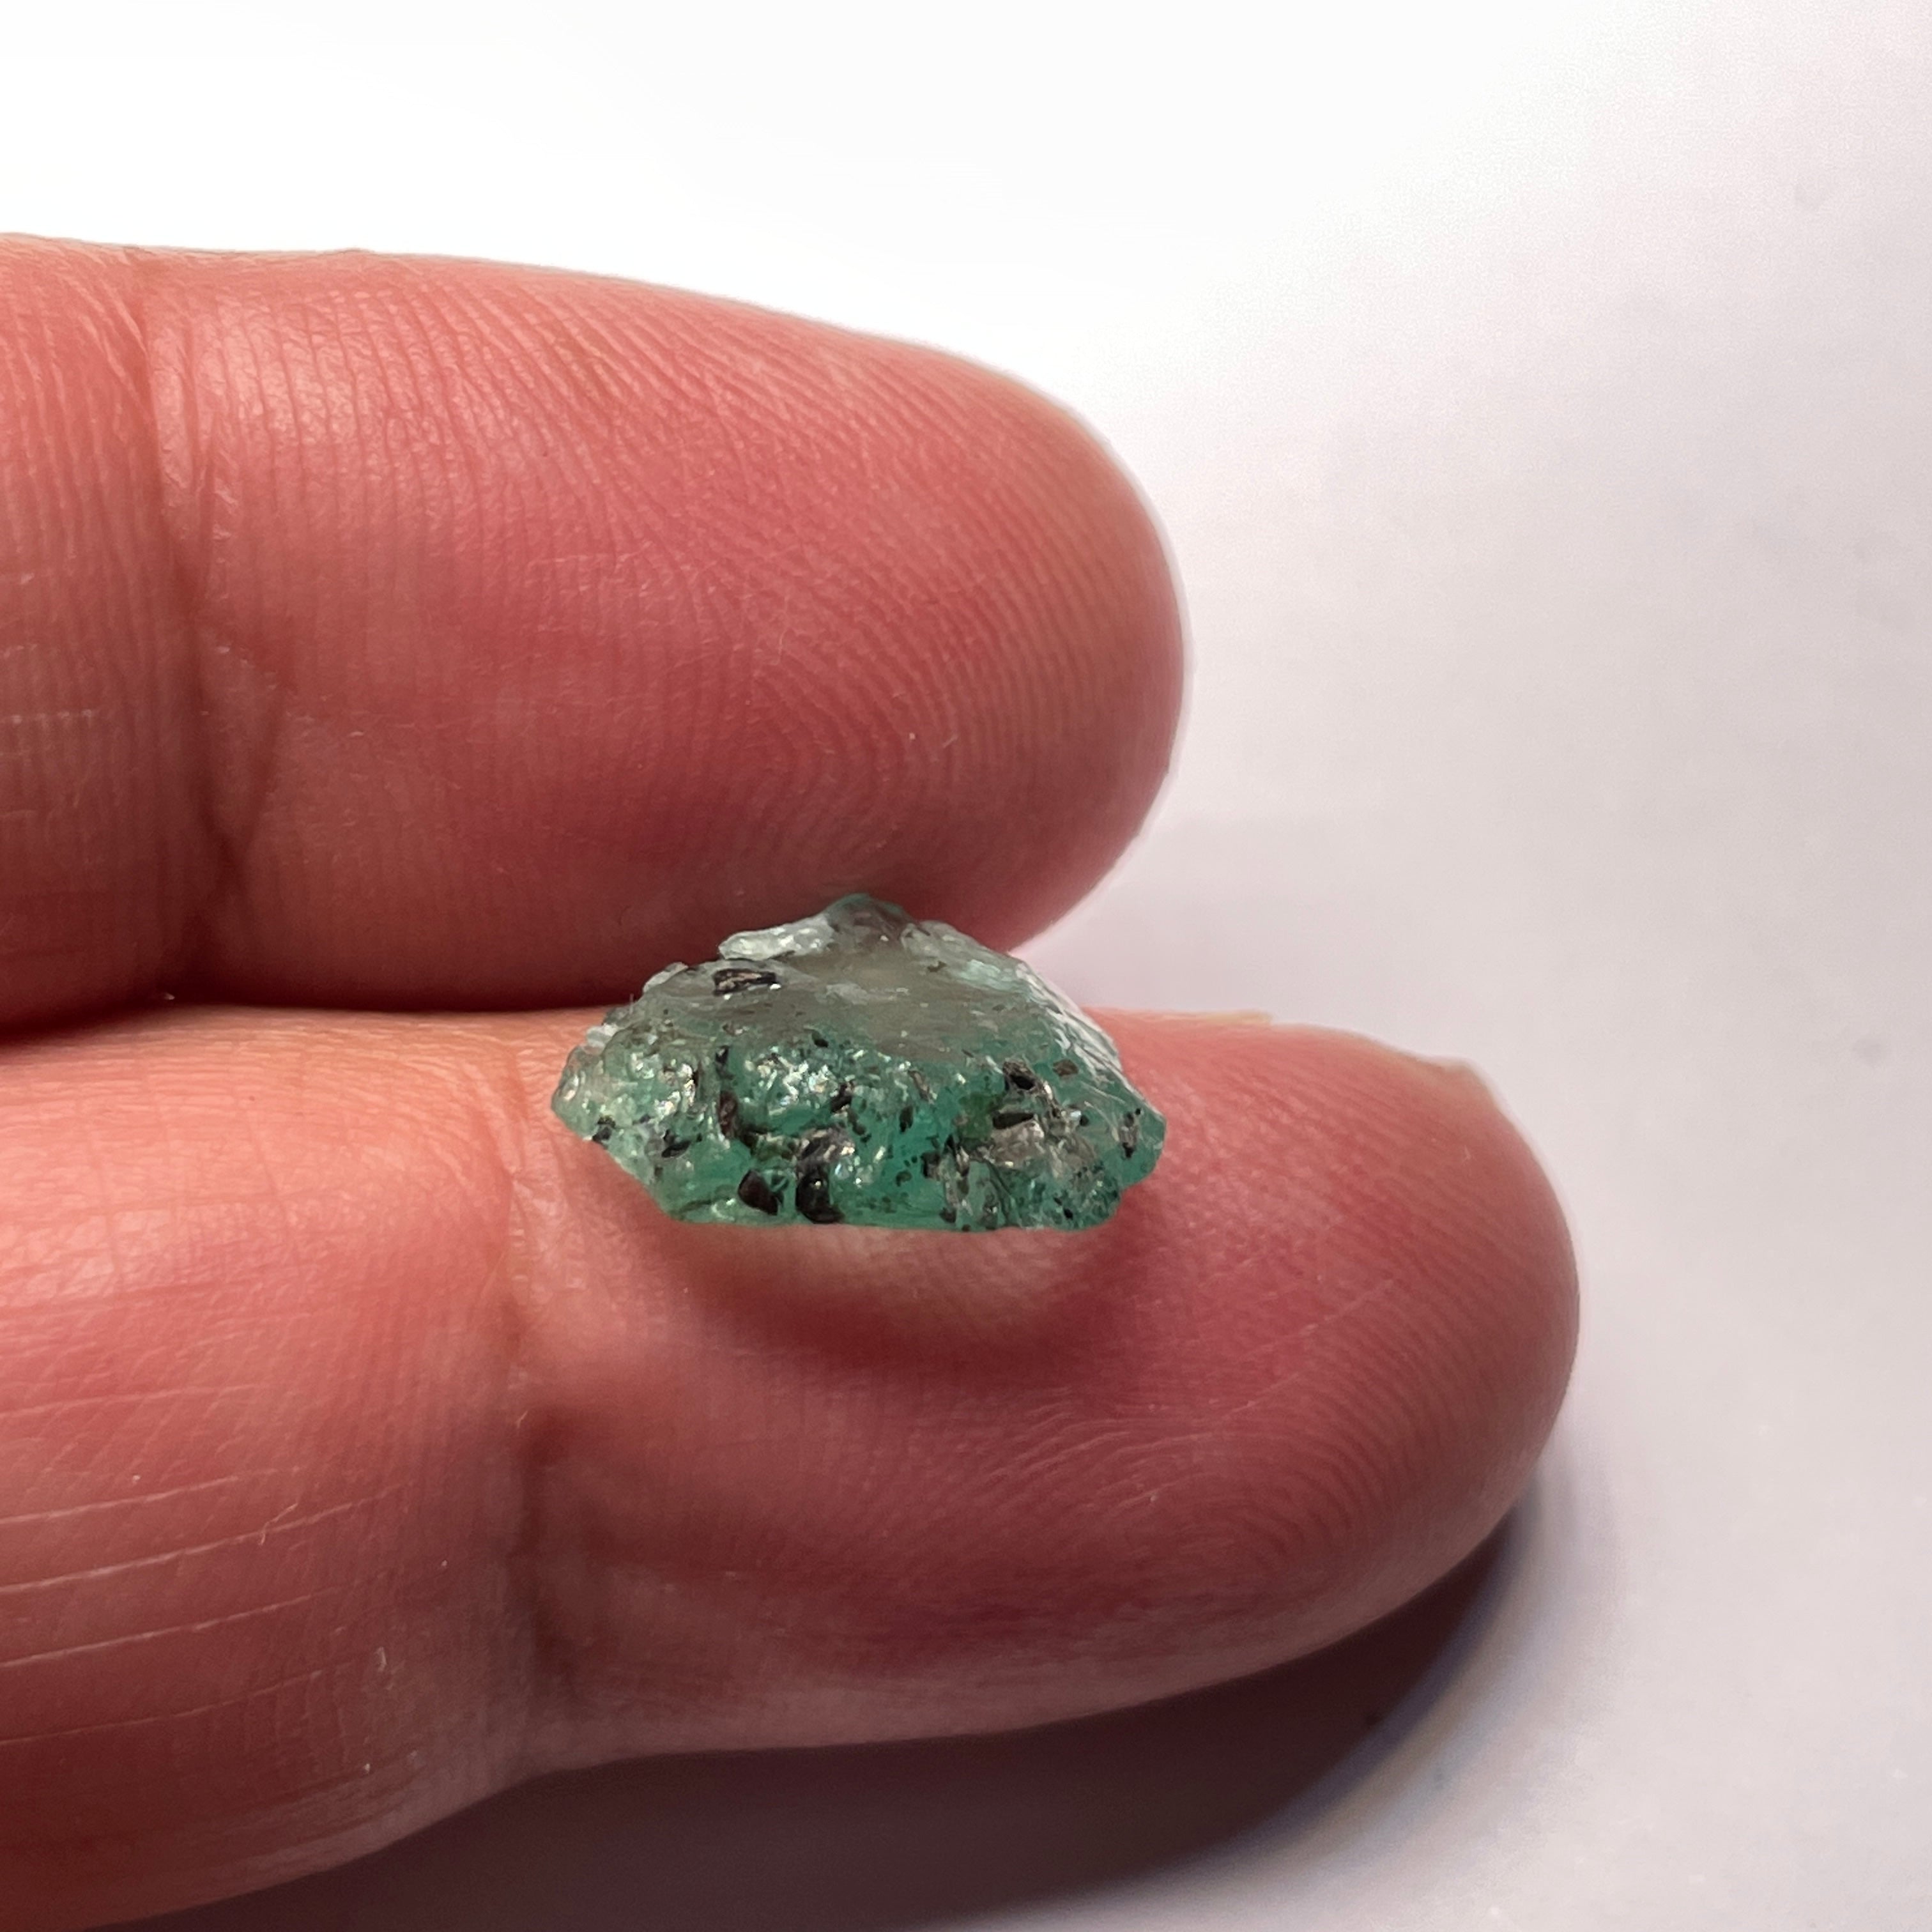 3.19Ct Emerald Tanzania Untreated Unheated No Oil Very Flat But Excellent For A Collection Or Set In